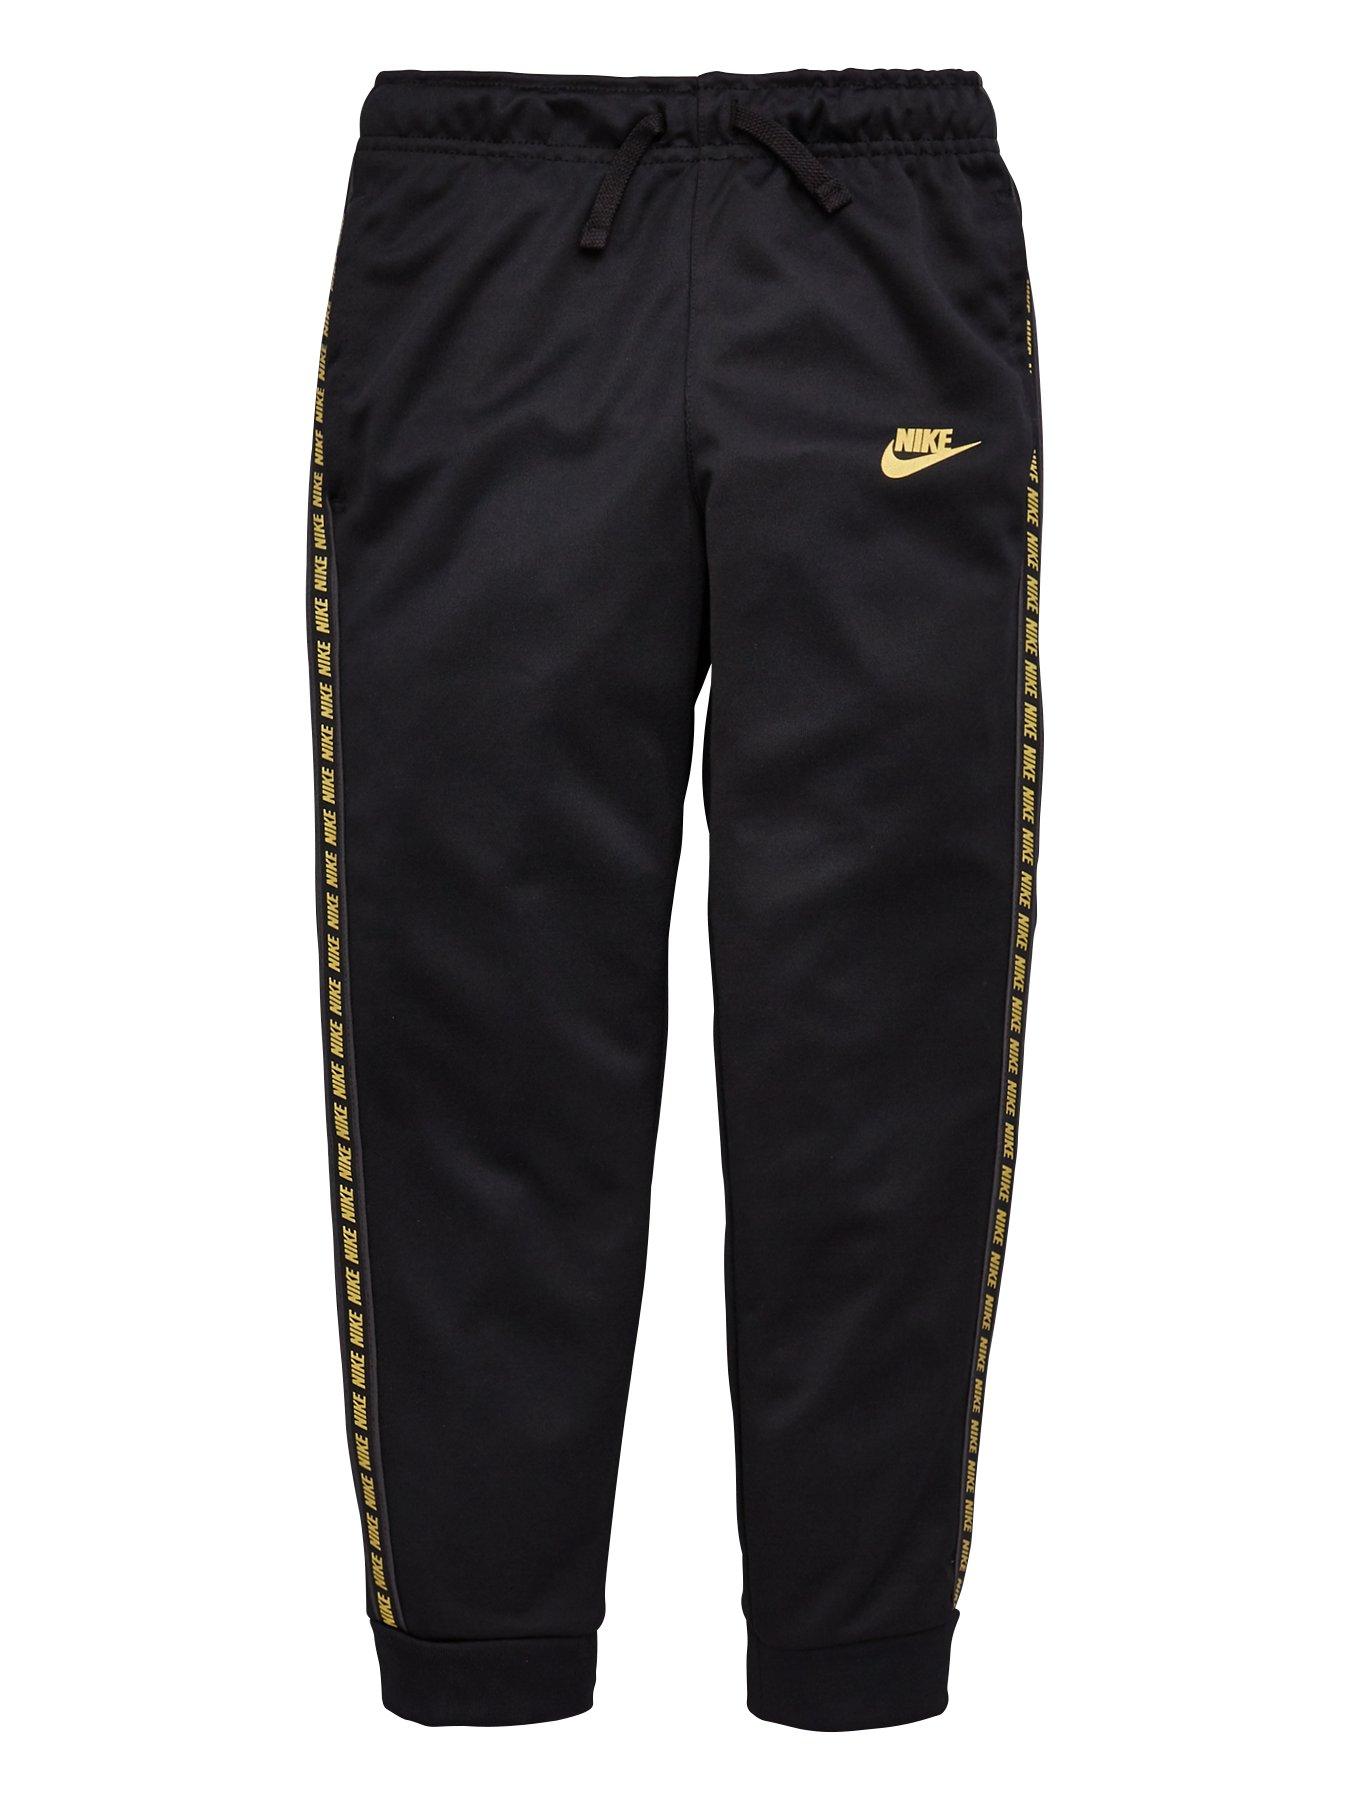 black and gold nike pants